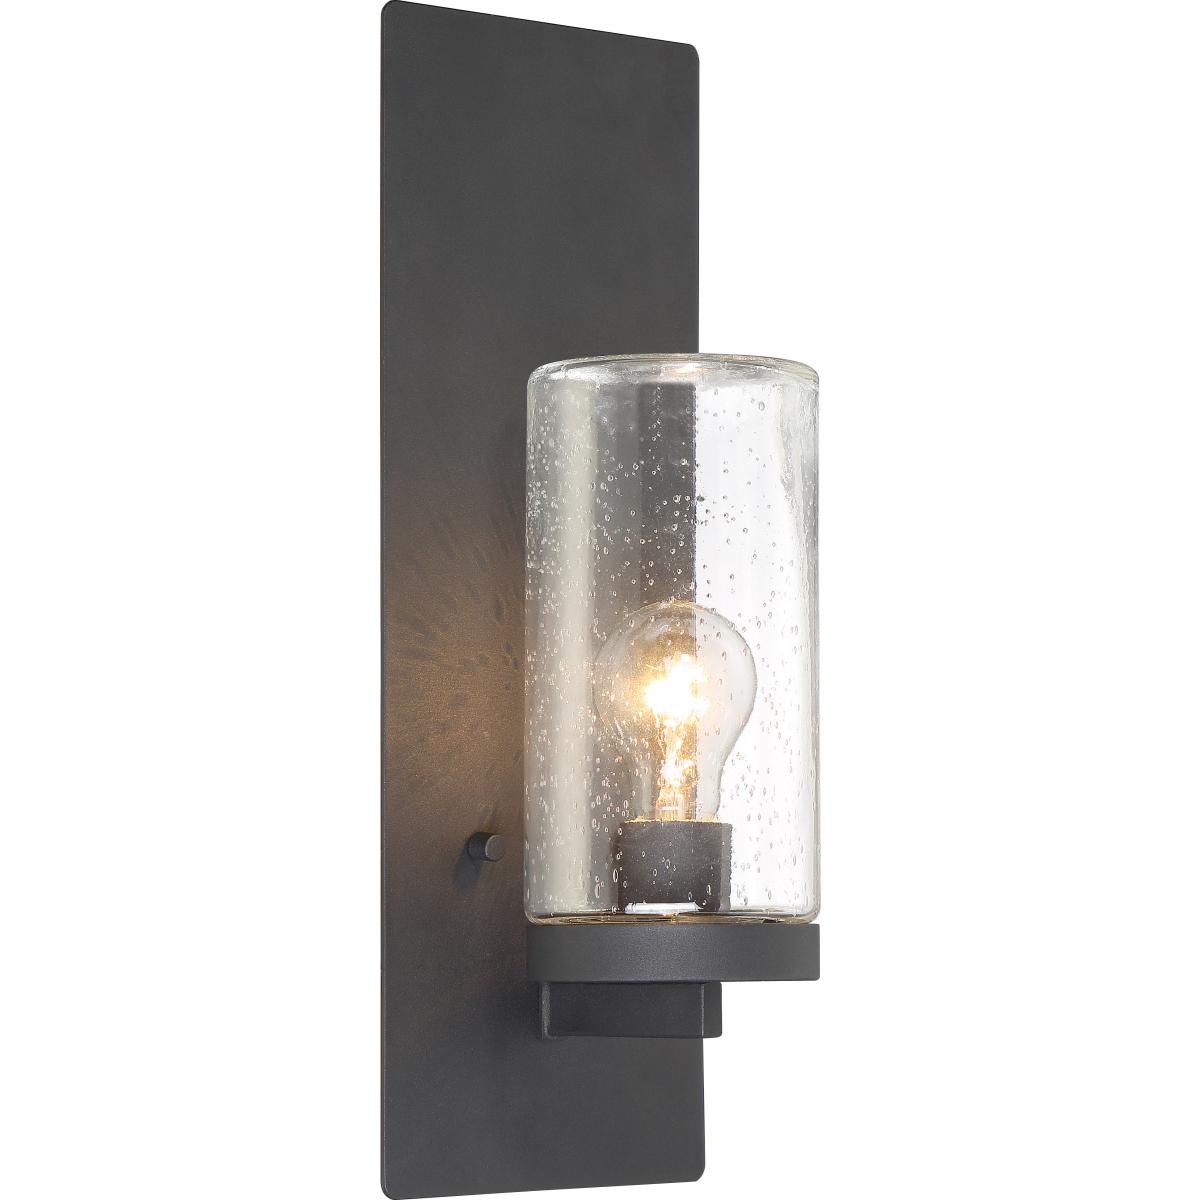 60-6578 INDIE 1 LT LARGE WALL SCONCE